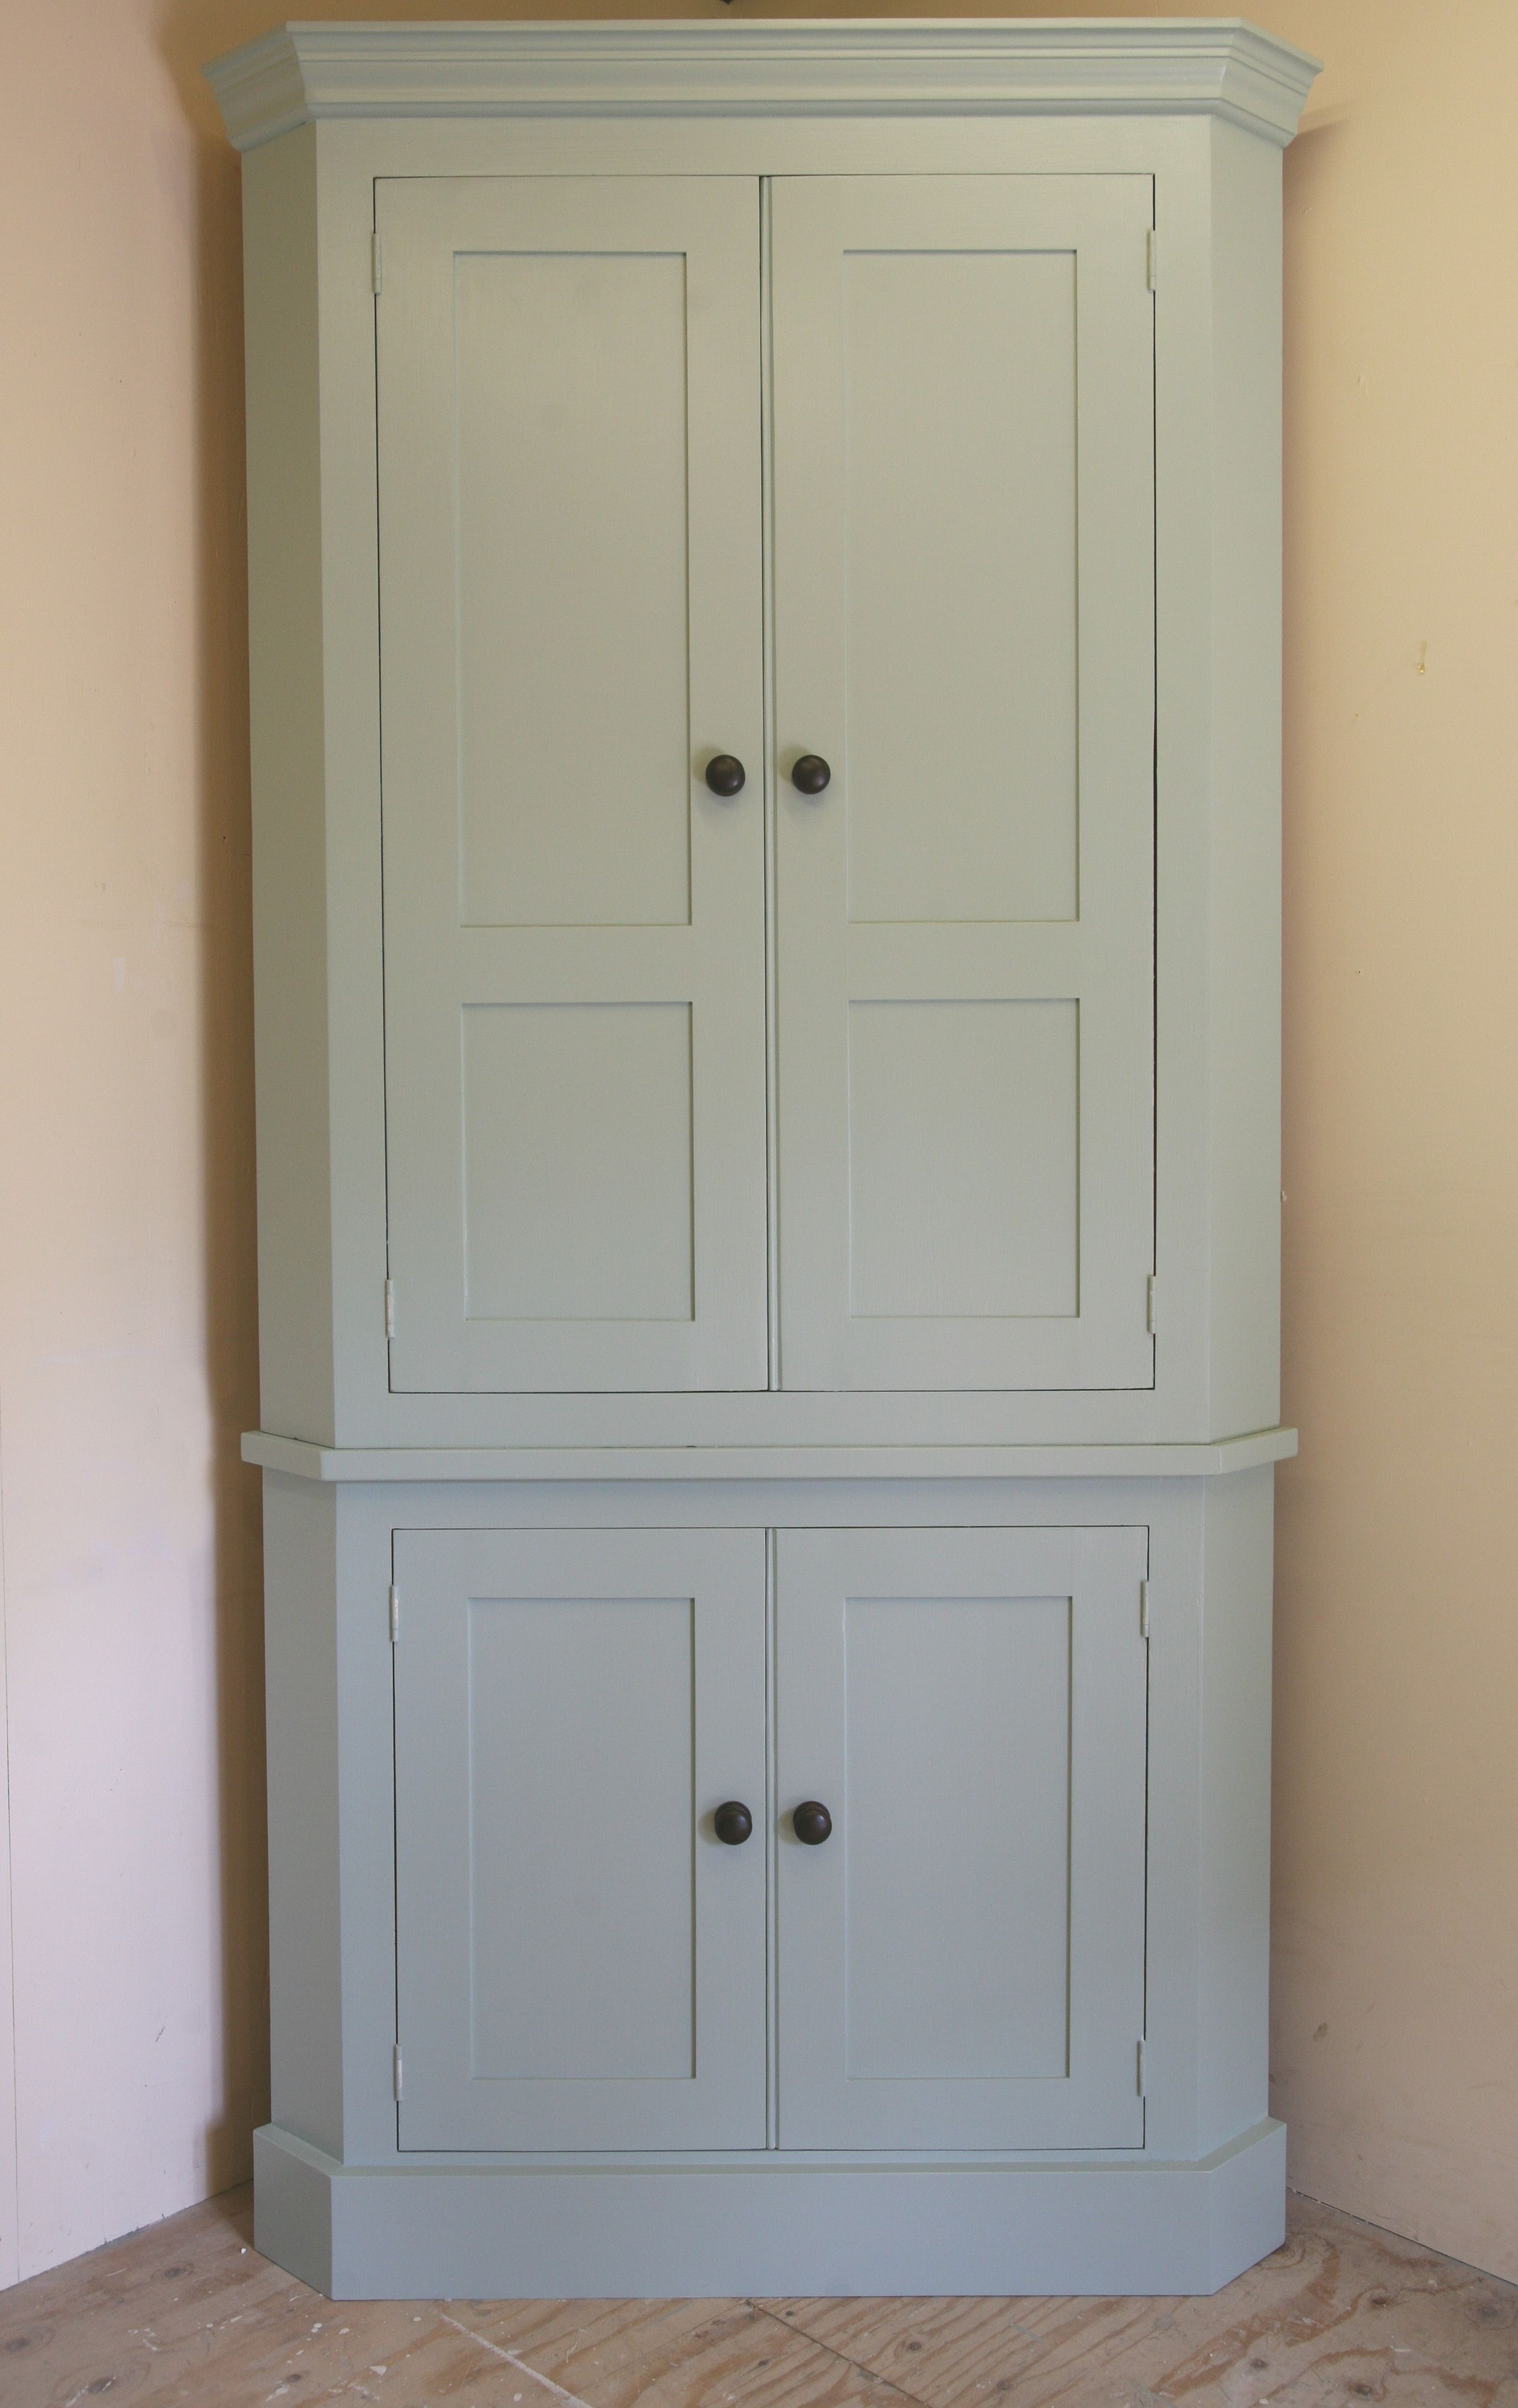 Complete Your Corner With Our Tall Larder Corner Cupboard This With Regard To Free Standing Kitchen Larder Cupboards (View 18 of 25)